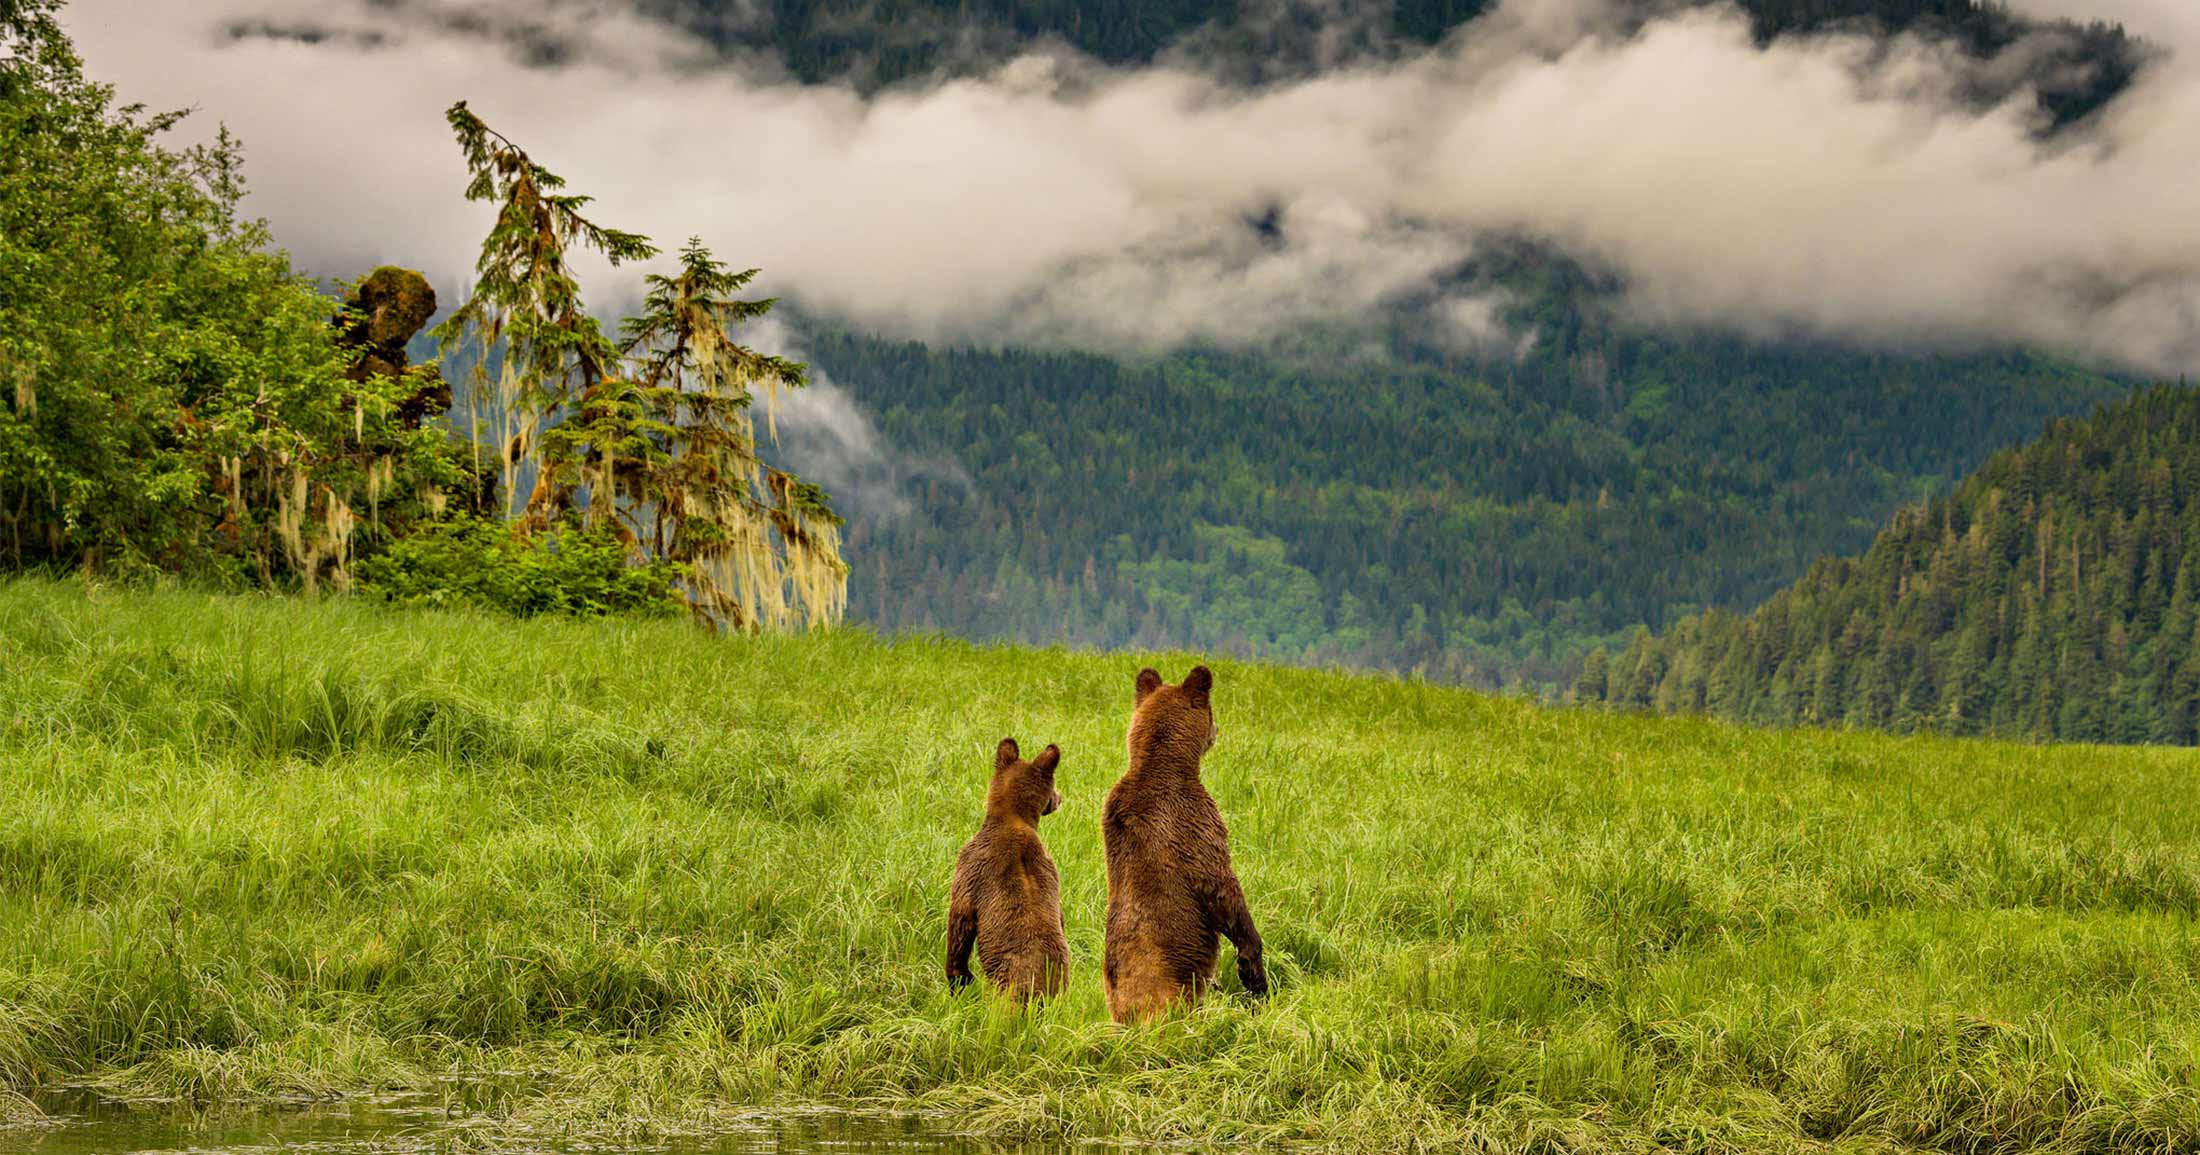 Two grizzly bears looking into the distance while standing in an estuary.